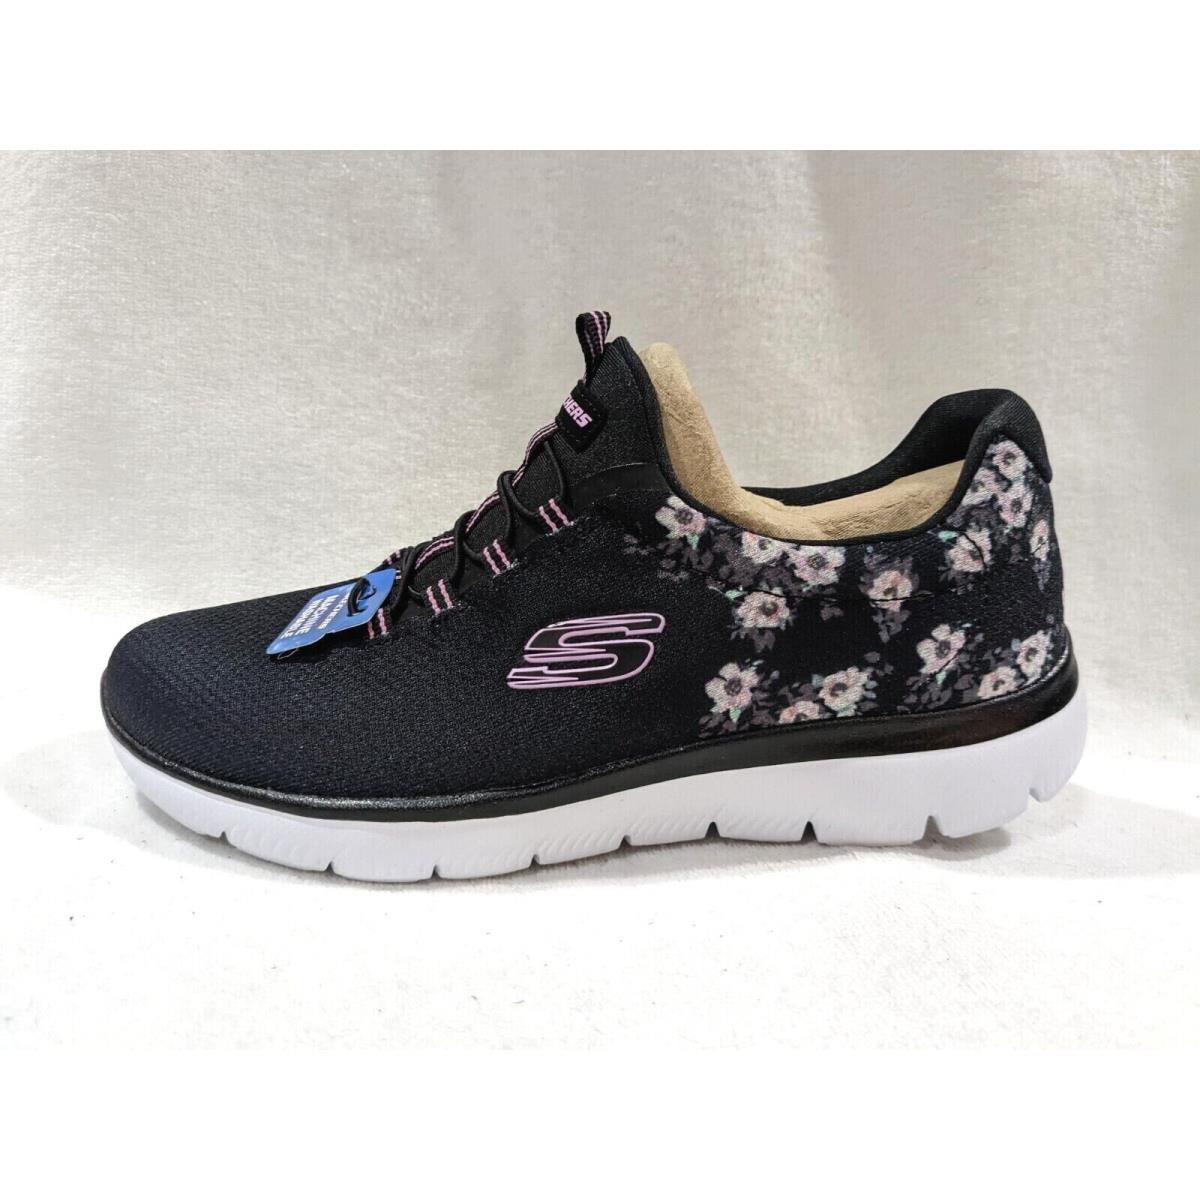 Skechers shoes Summits Perfect Blossom - Black 5